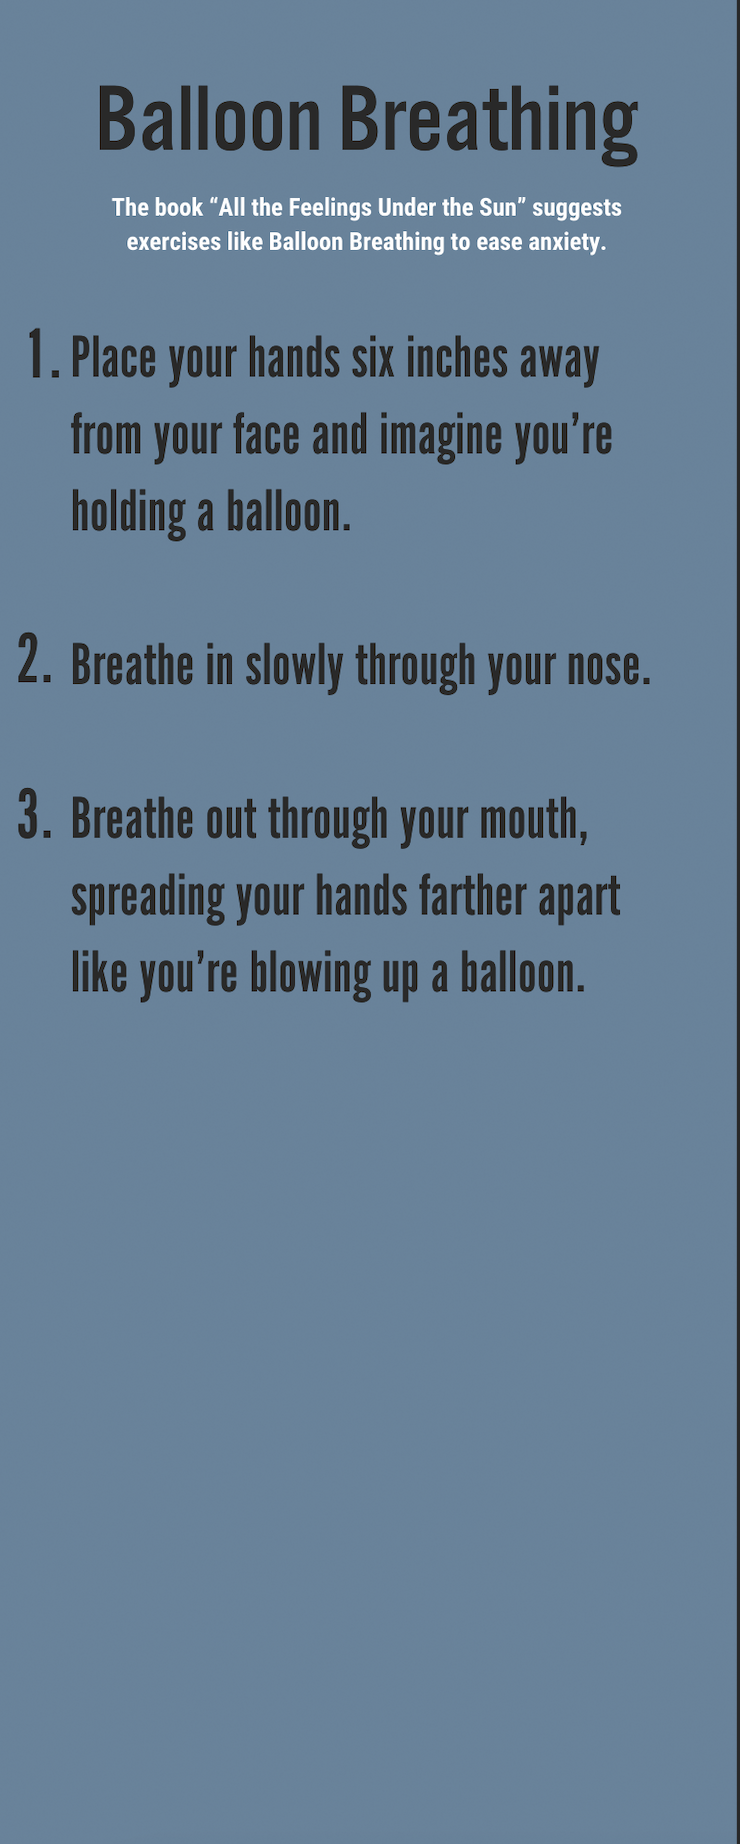 Davenport&squot;s book "All the Feelings Under the Sun" provides concrete ways for kids to practice mindfulness exercises. One exercise is Balloon Breathing. Infographic by Gabrielle Salgado